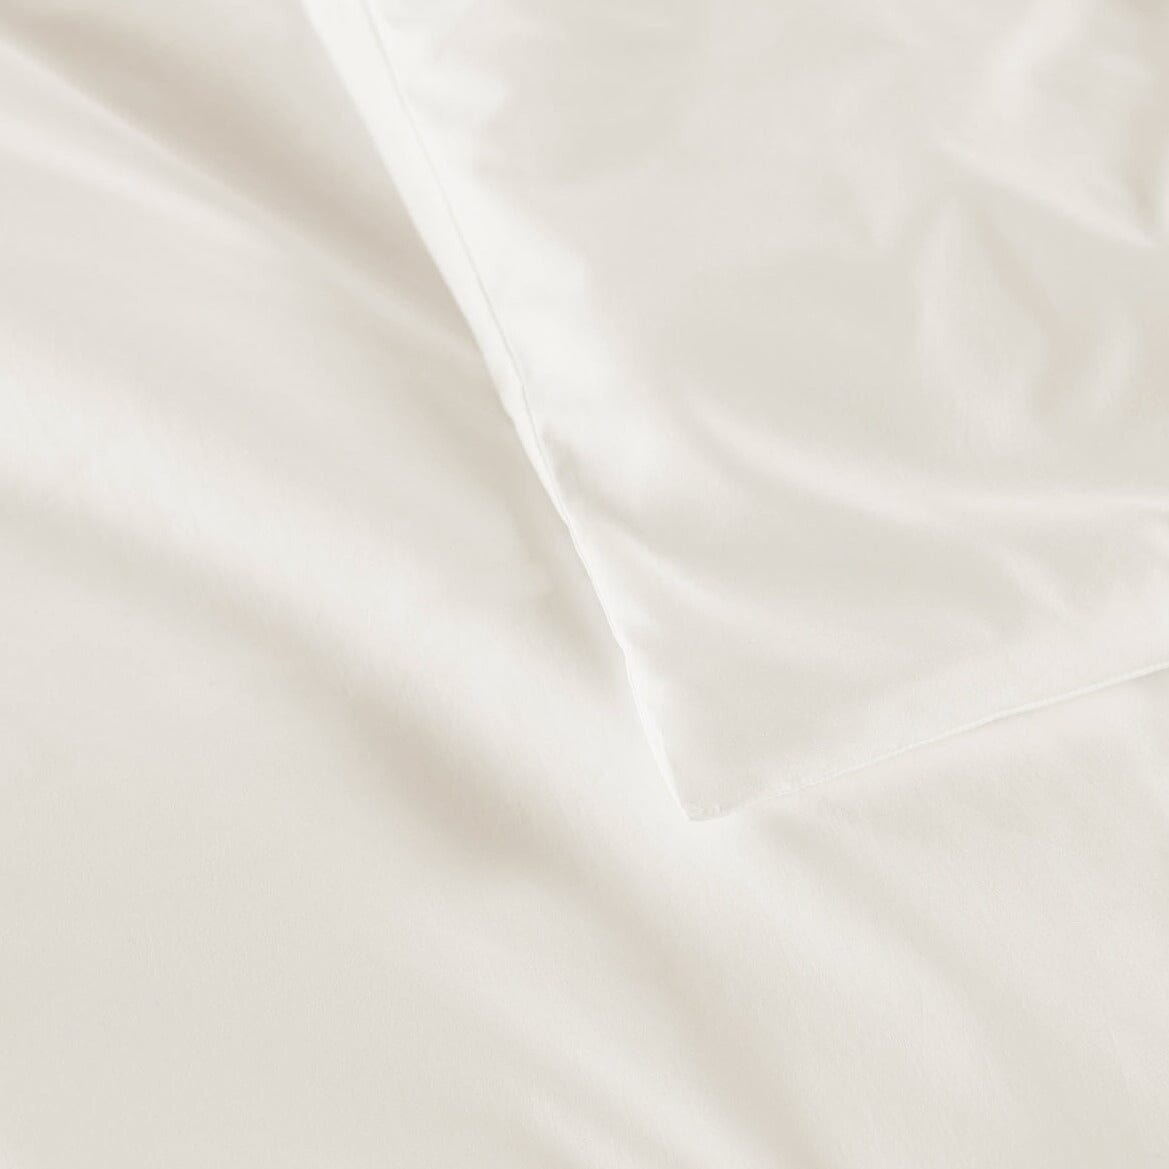 Corner Detail of Duvet - Peacock Alley Percale Cotton Bedding | Lyric Ivory at Fig Linens and Home